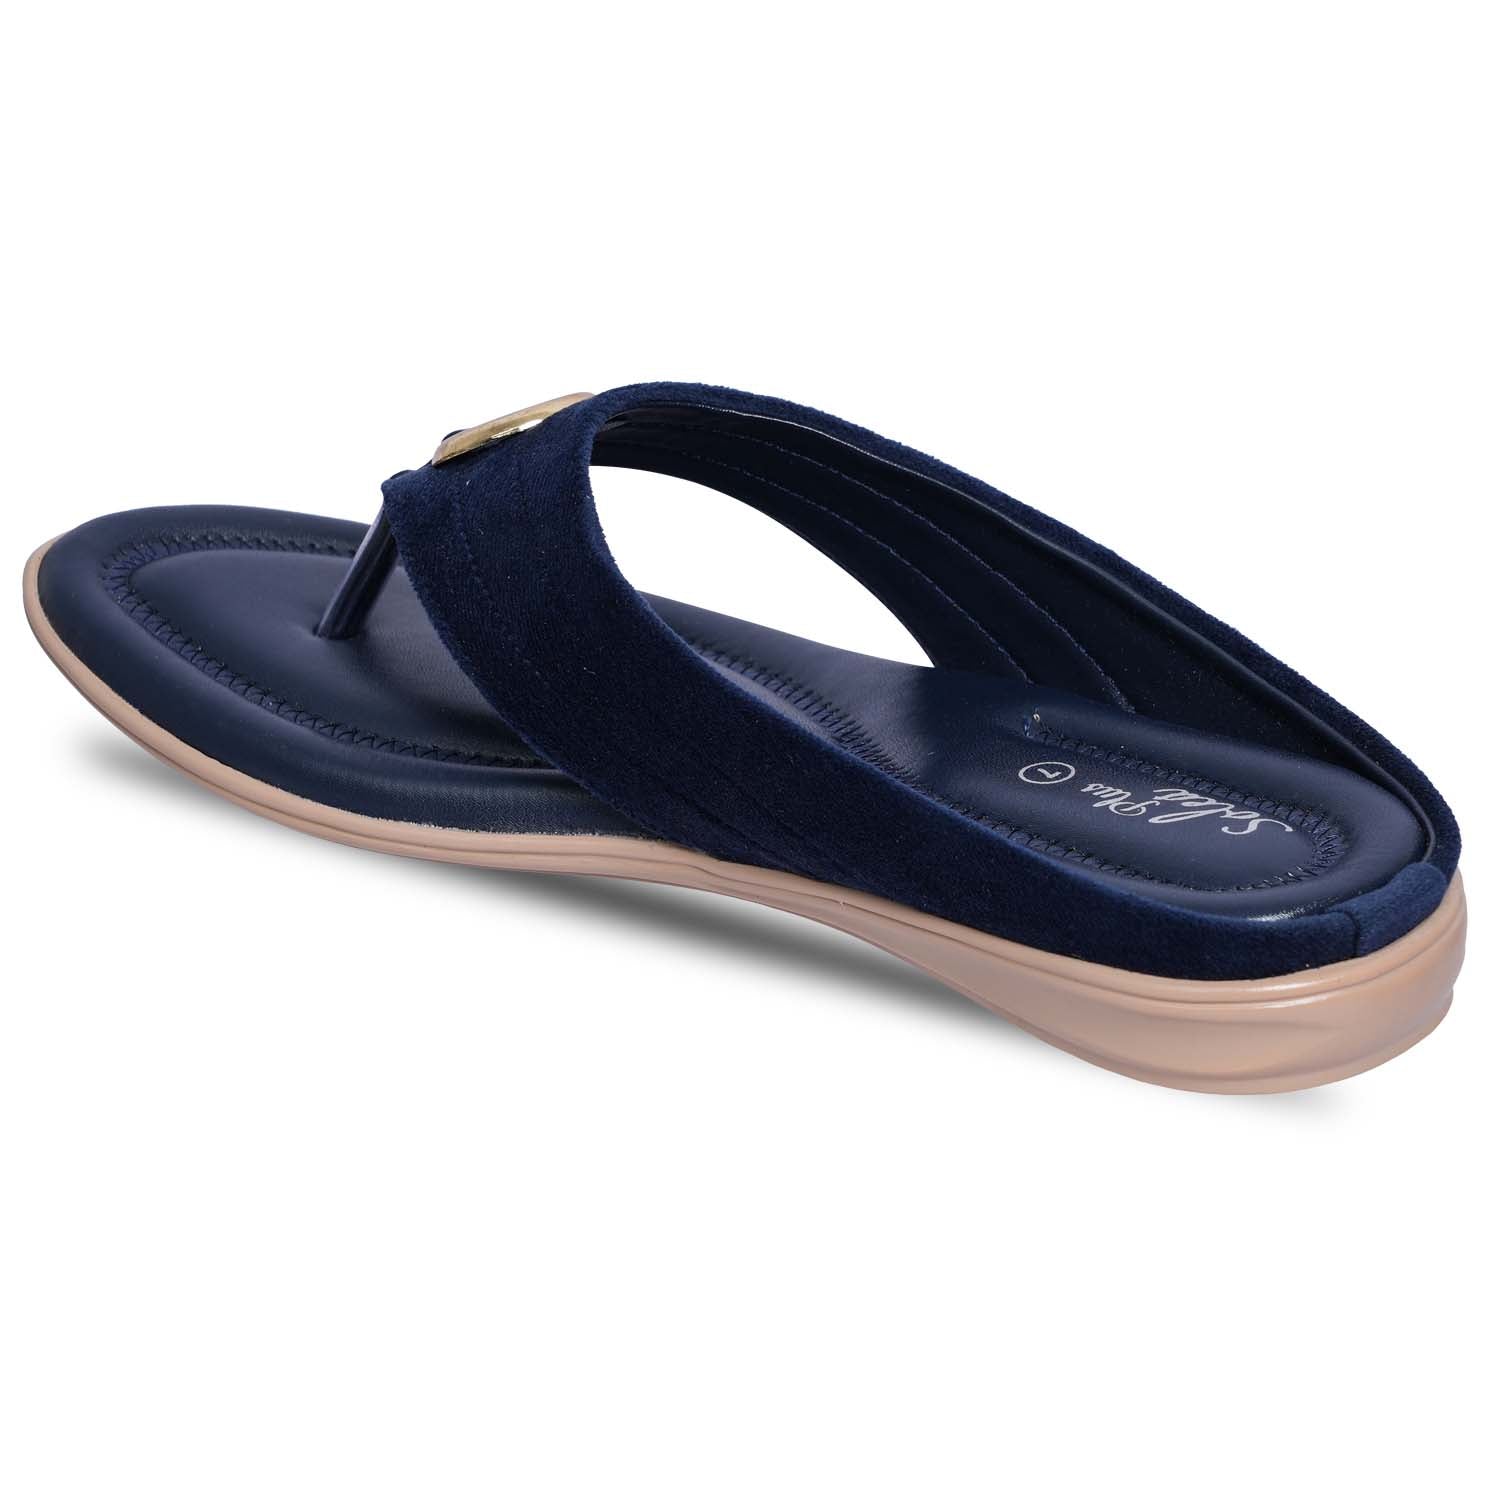 Paragon R1015L Women Sandals | Casual &amp; Formal Sandals | Stylish, Comfortable &amp; Durable | For Daily &amp; Occasion Wear